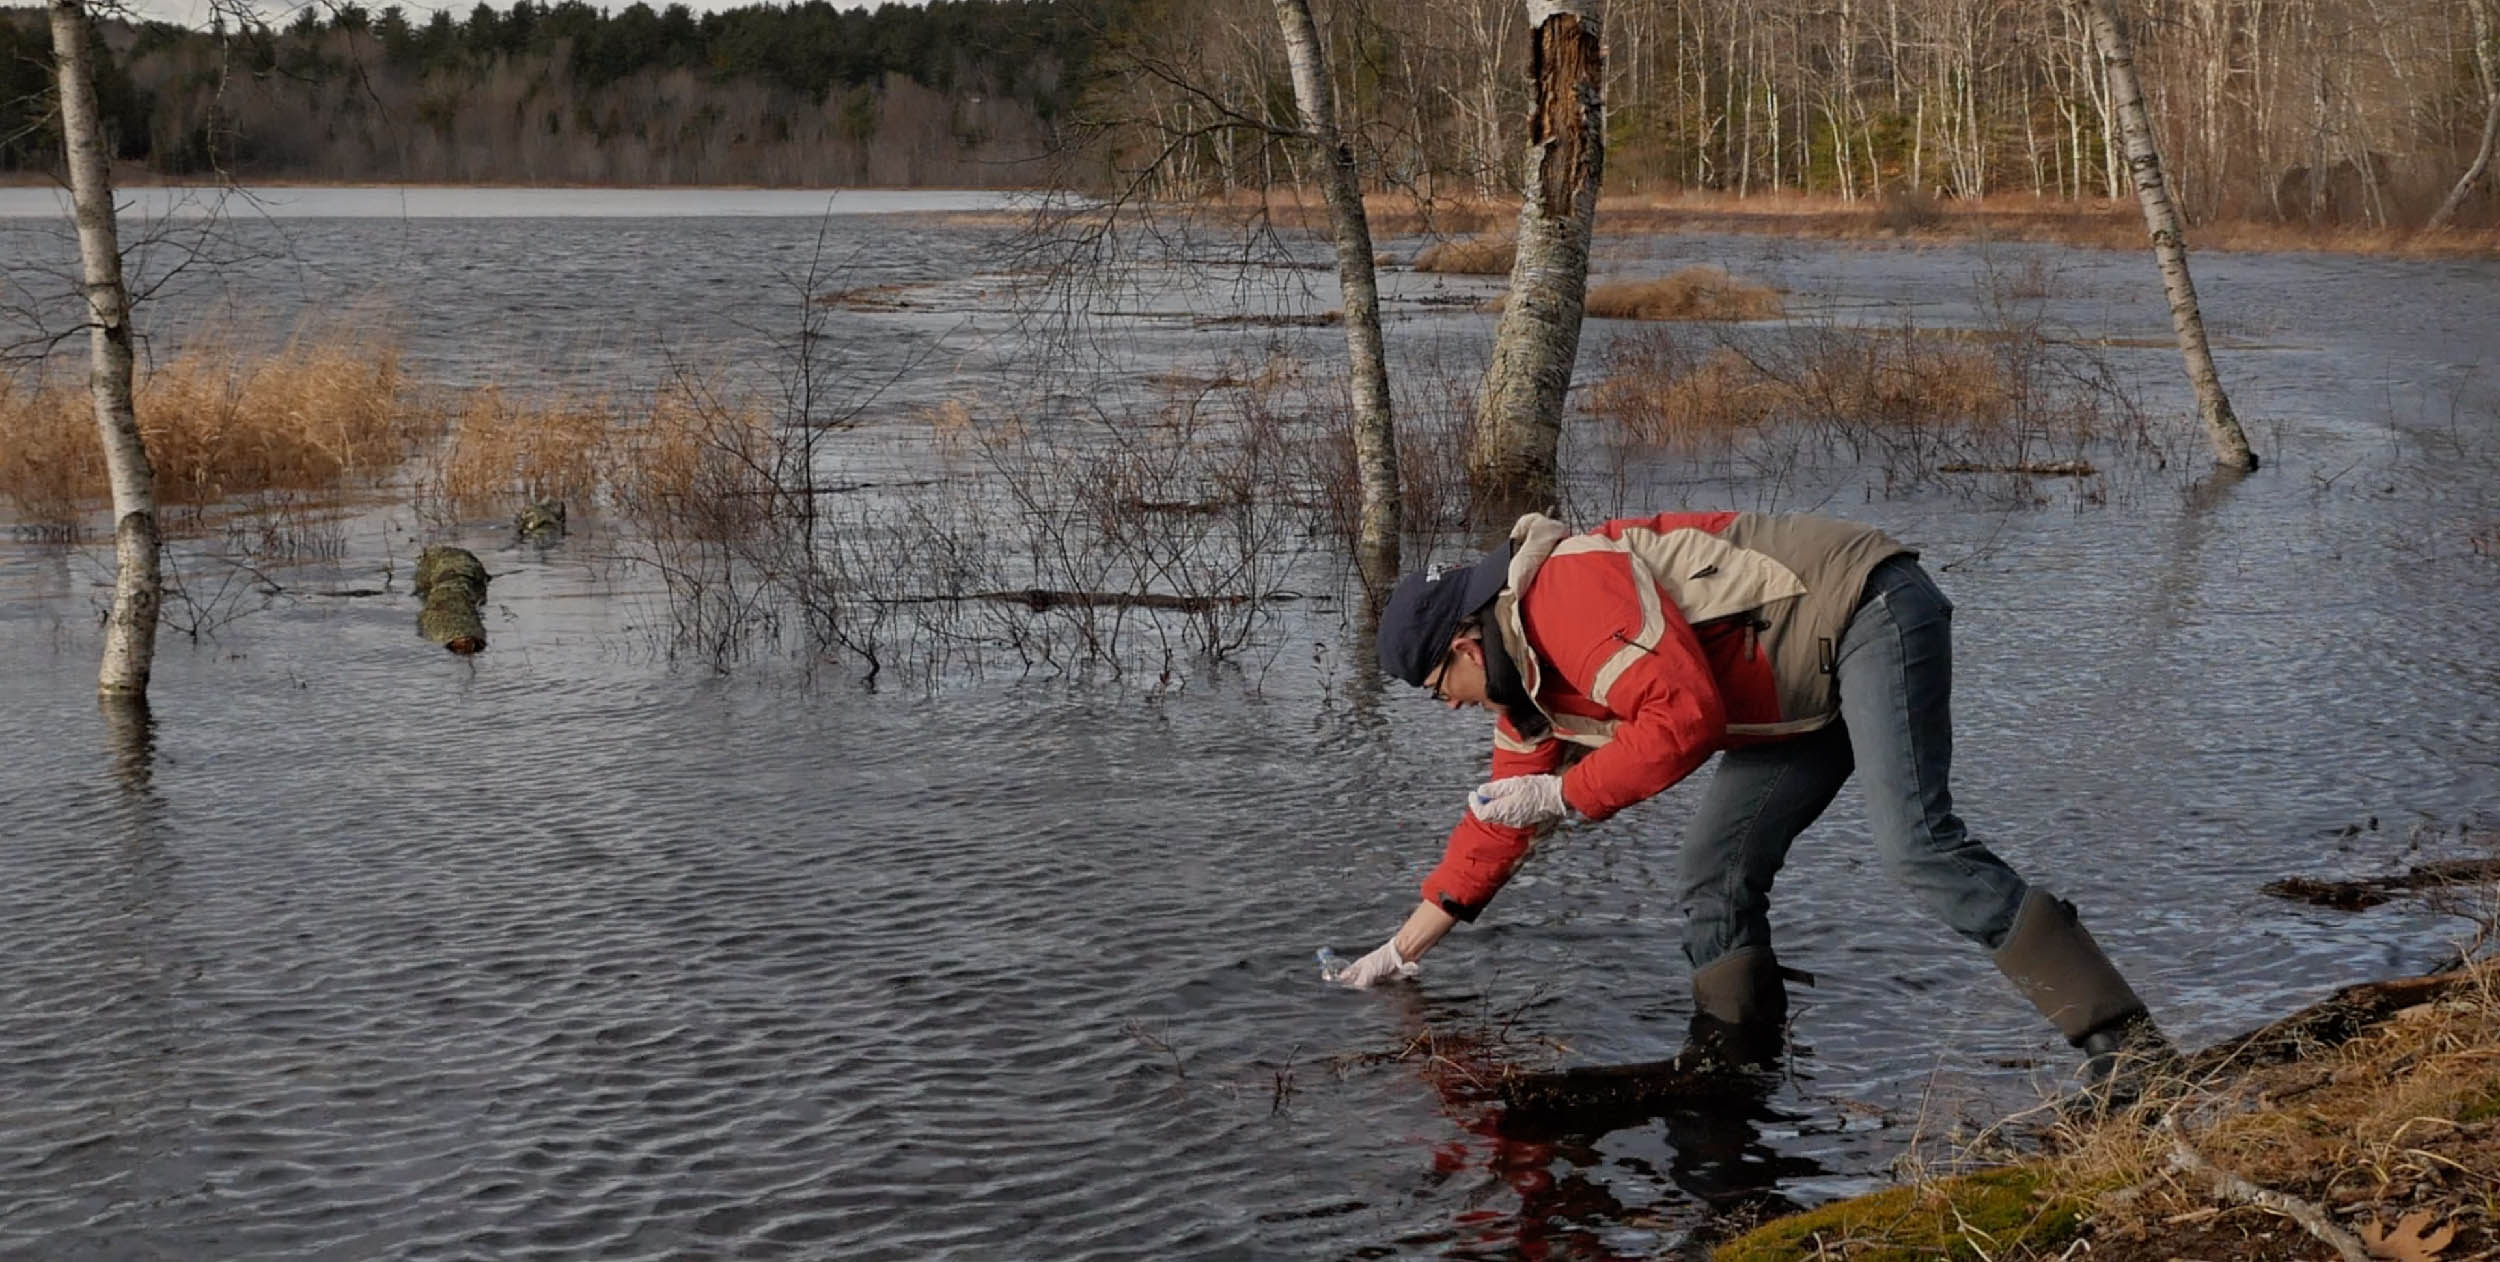 Jennifer Smith-Mayo (Ph.D. student UMaine) conducts eDNA sampling at Basin Pond in Monroe, ME